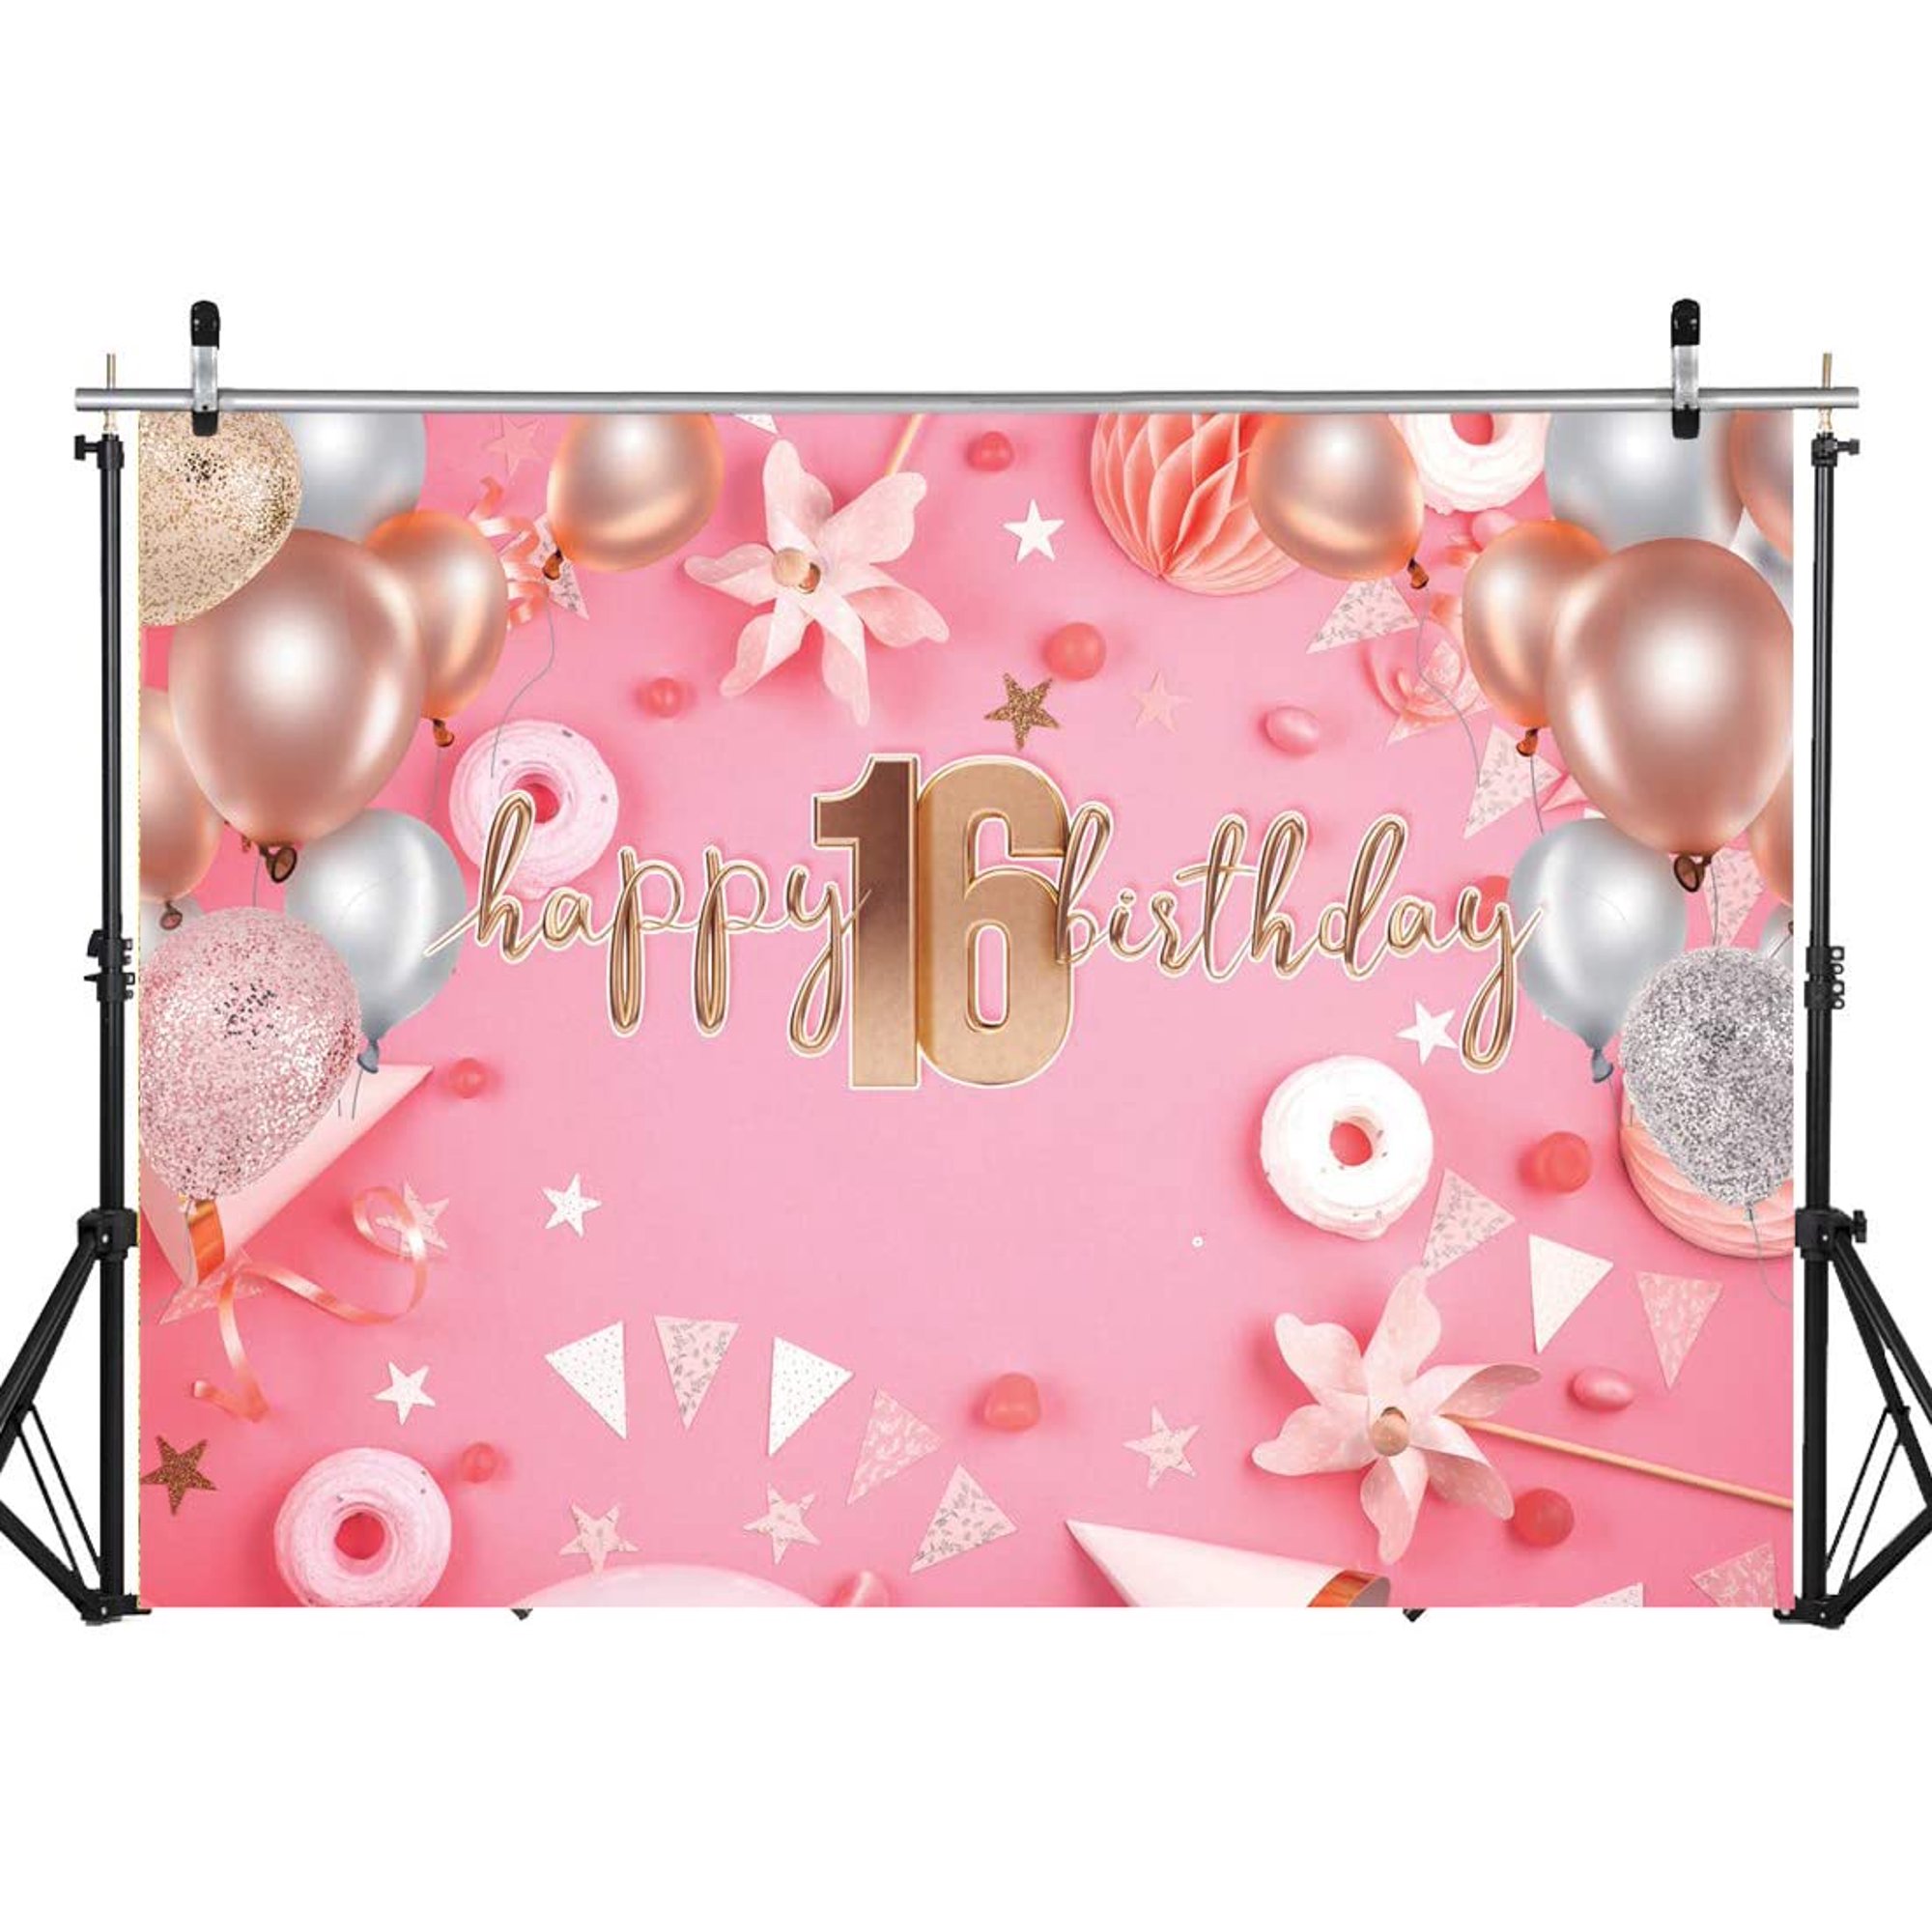 Sjoloon xft sweet party backdrop pink happy th birthday decorations background pink th birthday backdrops nada